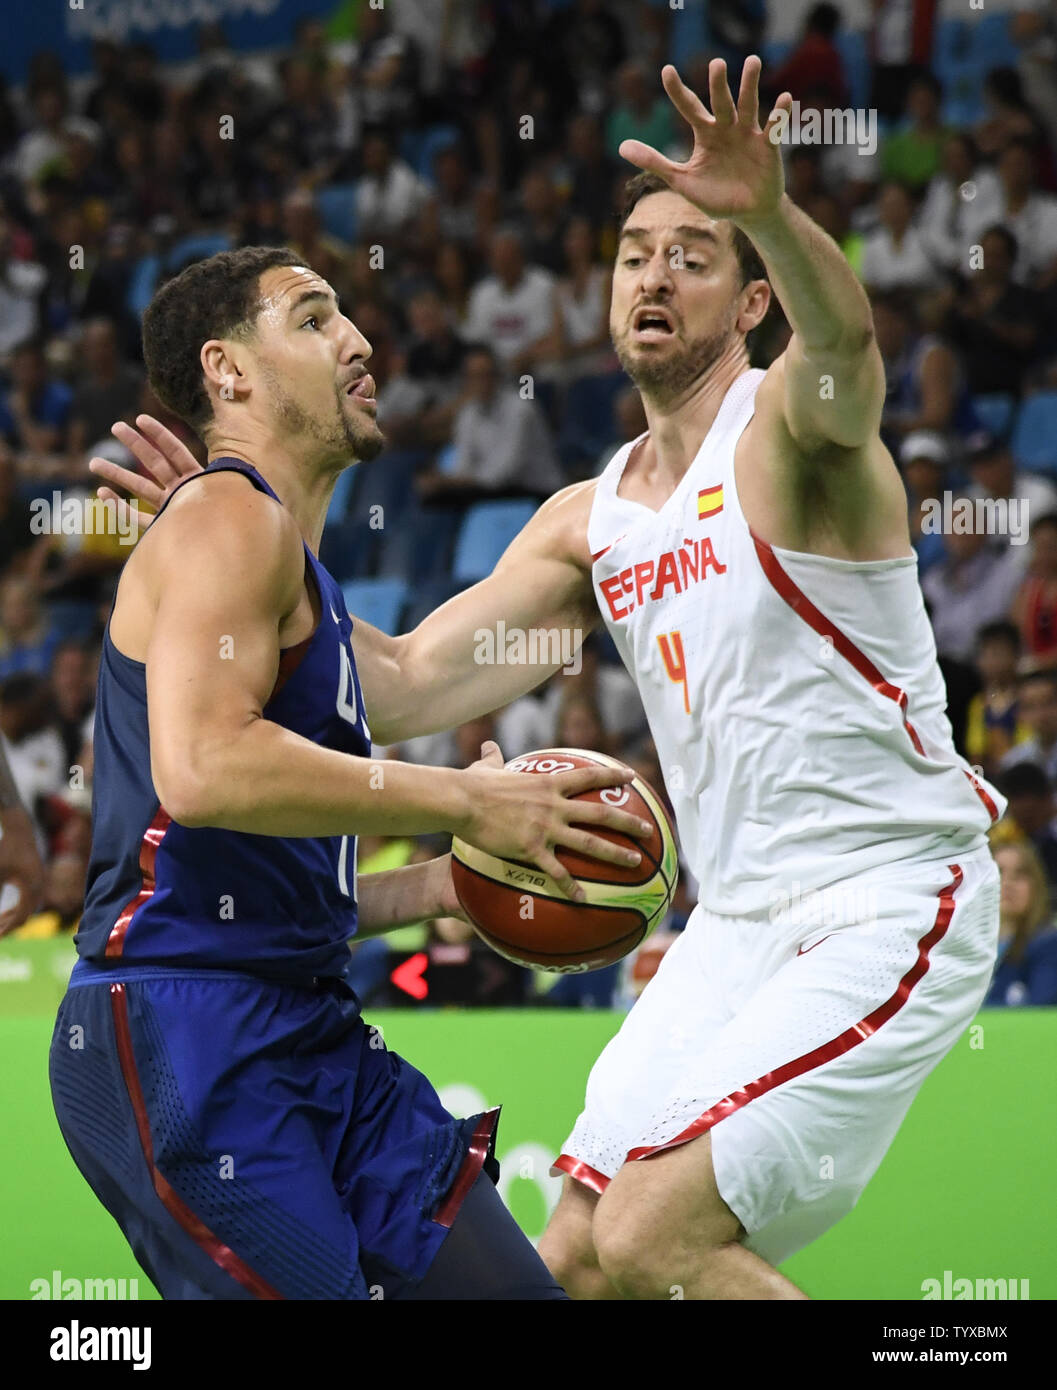 United States' Klay Thpmson (lL) drives to the basket against Spain's Gau  Pasol during the USA vs Spain Men's Semifinal Basketball game at the 2016  Rio Summer Olympics in Rio de Janeiro,